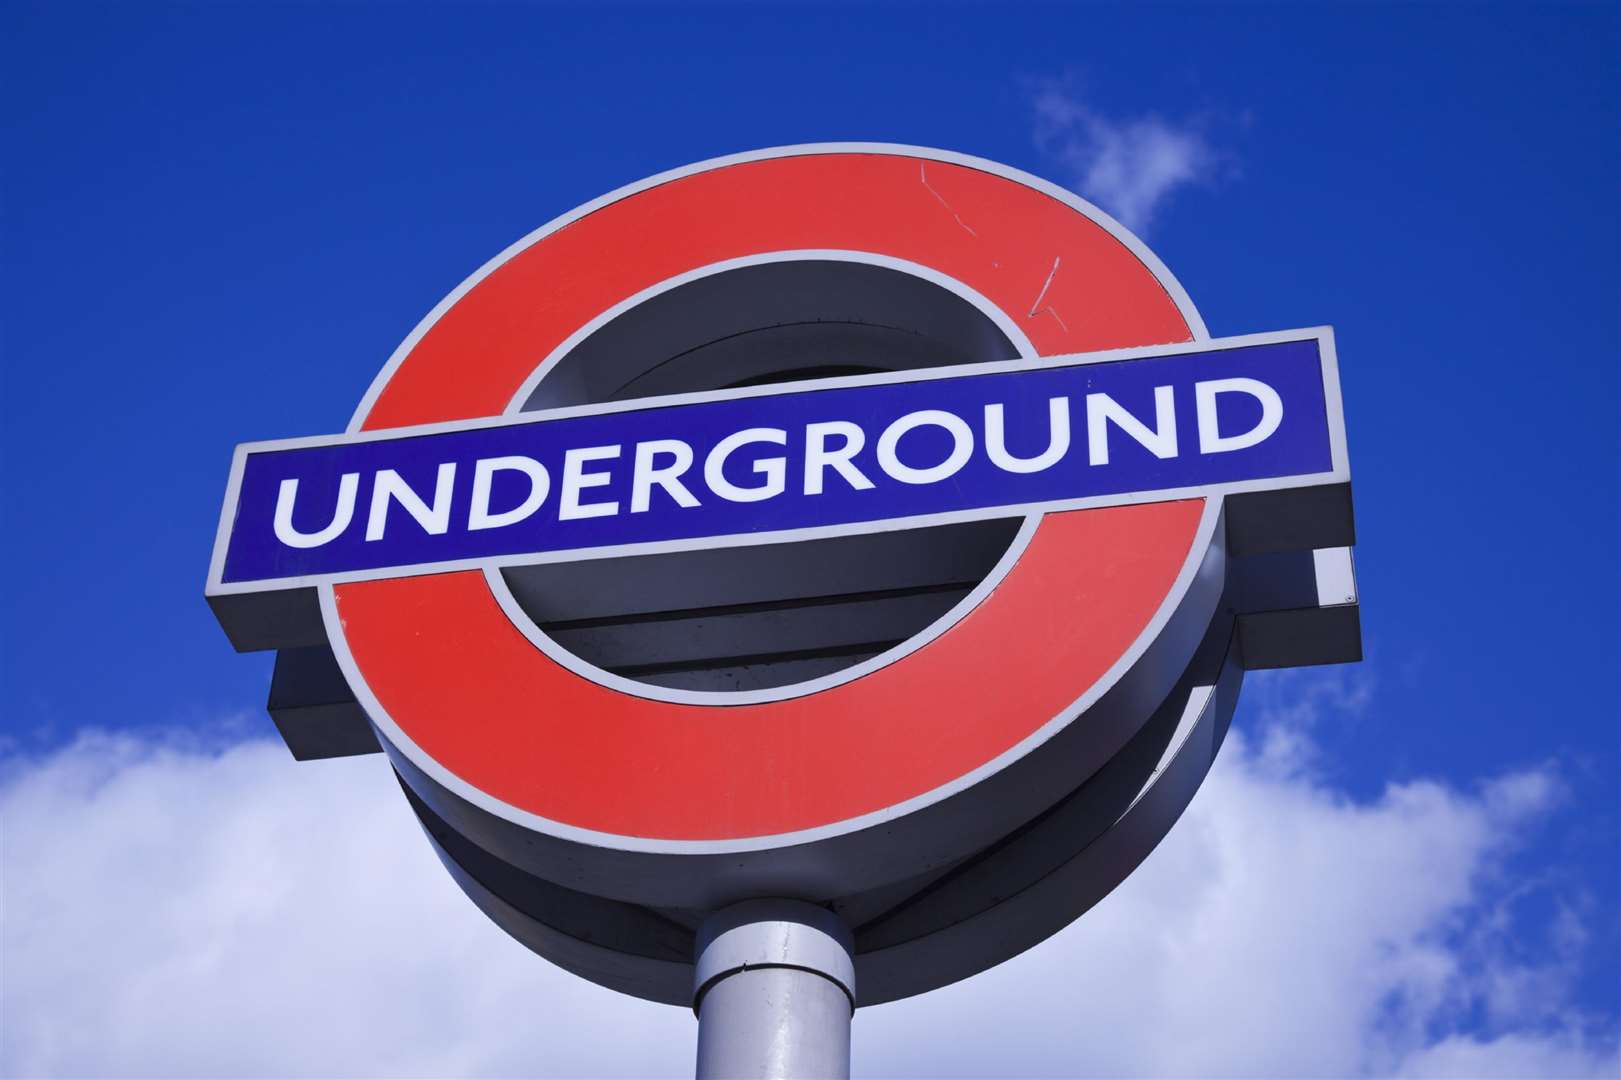 A Maidstone man's body remained on the tracks for hours on the London Underground last year, it has emerged. Photo: iStock